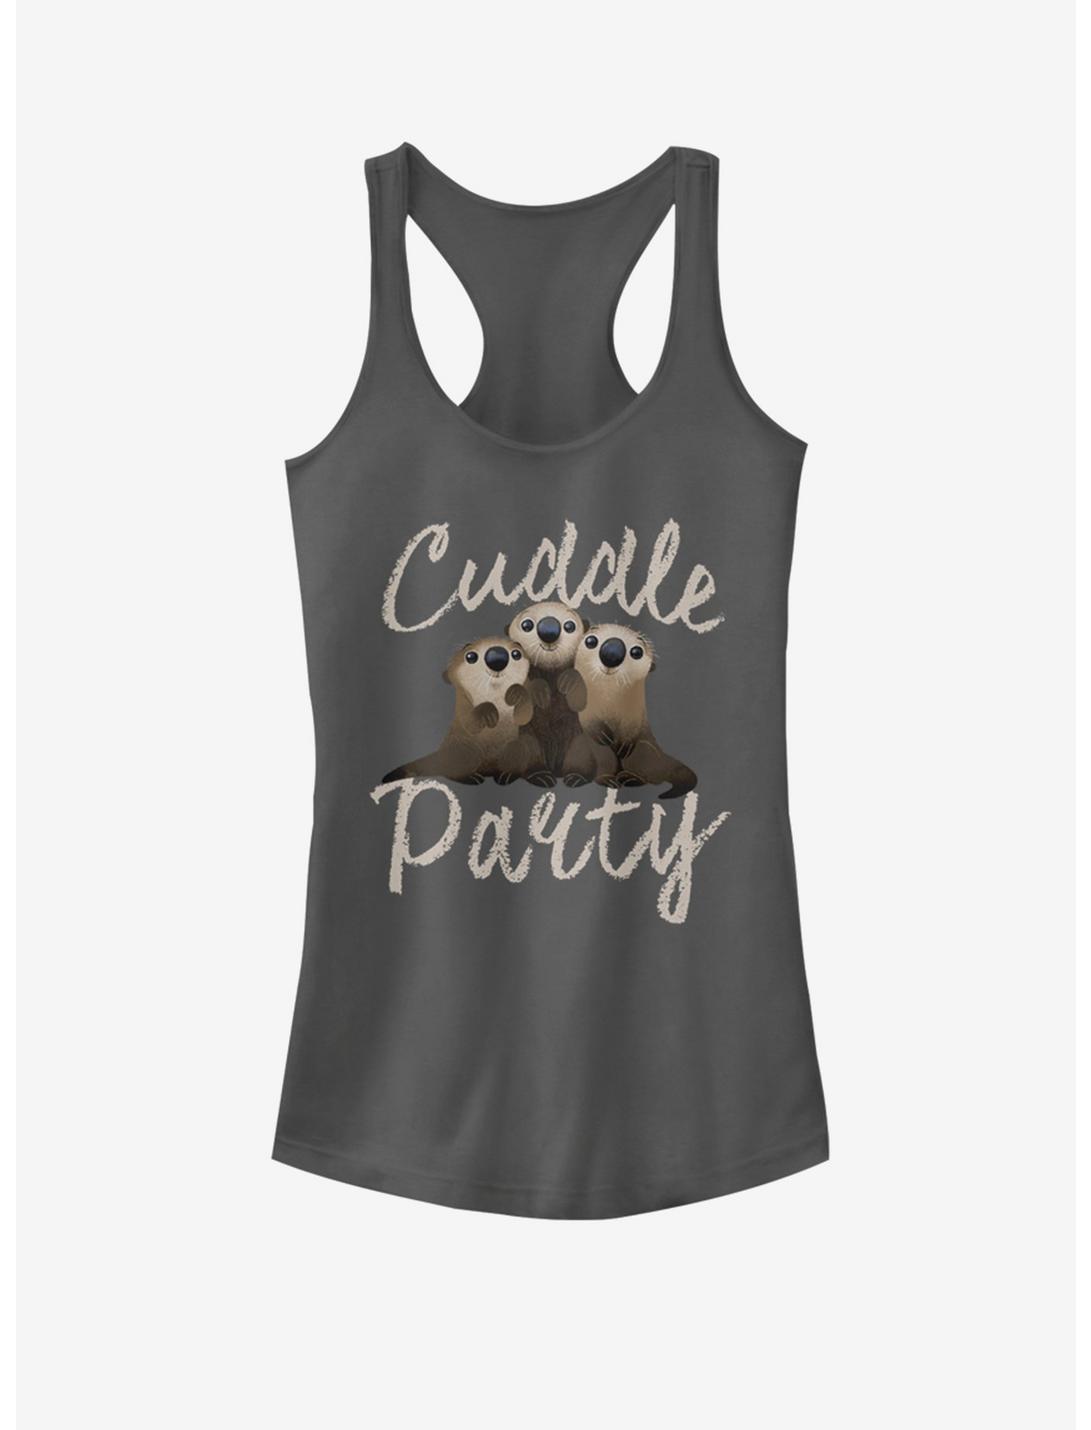 Disney Pixar Finding Dory Cuddle Party Girls Tank, CHARCOAL, hi-res